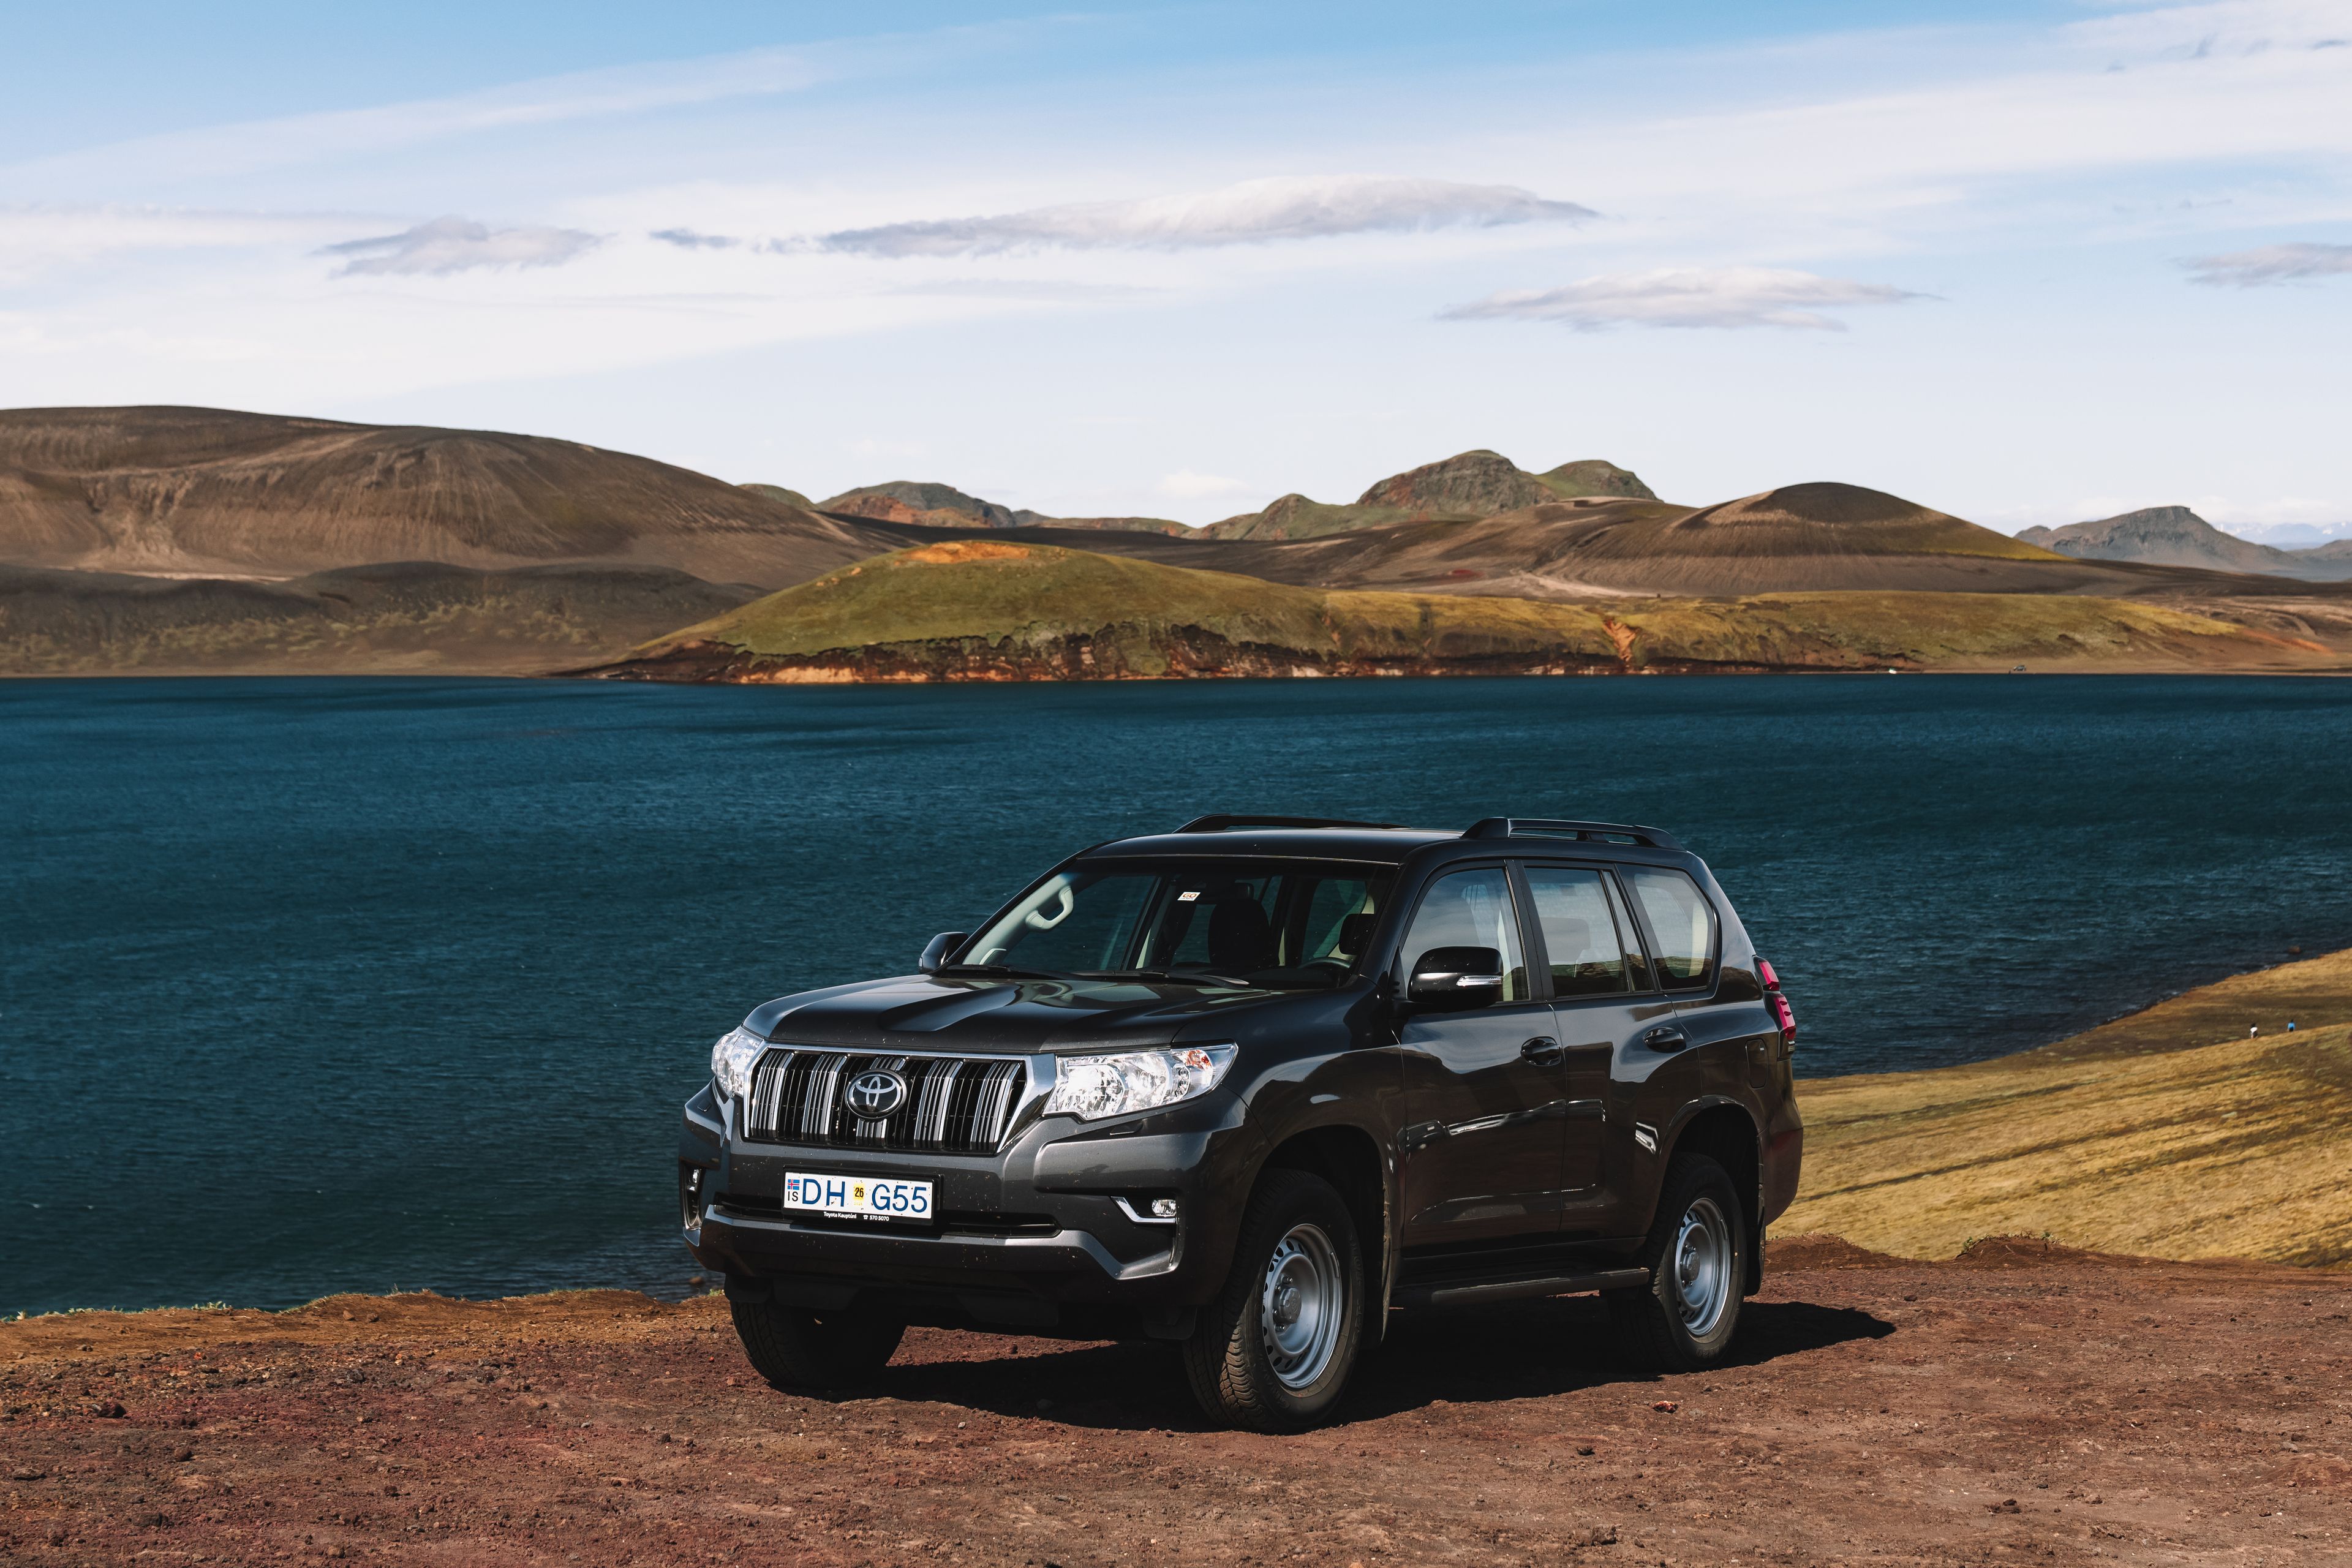 A robust Toyota Land Cruiser from Go Car Rental tackling off-road conditions in Iceland, showcasing the adventurous side of an Iceland self-drive to